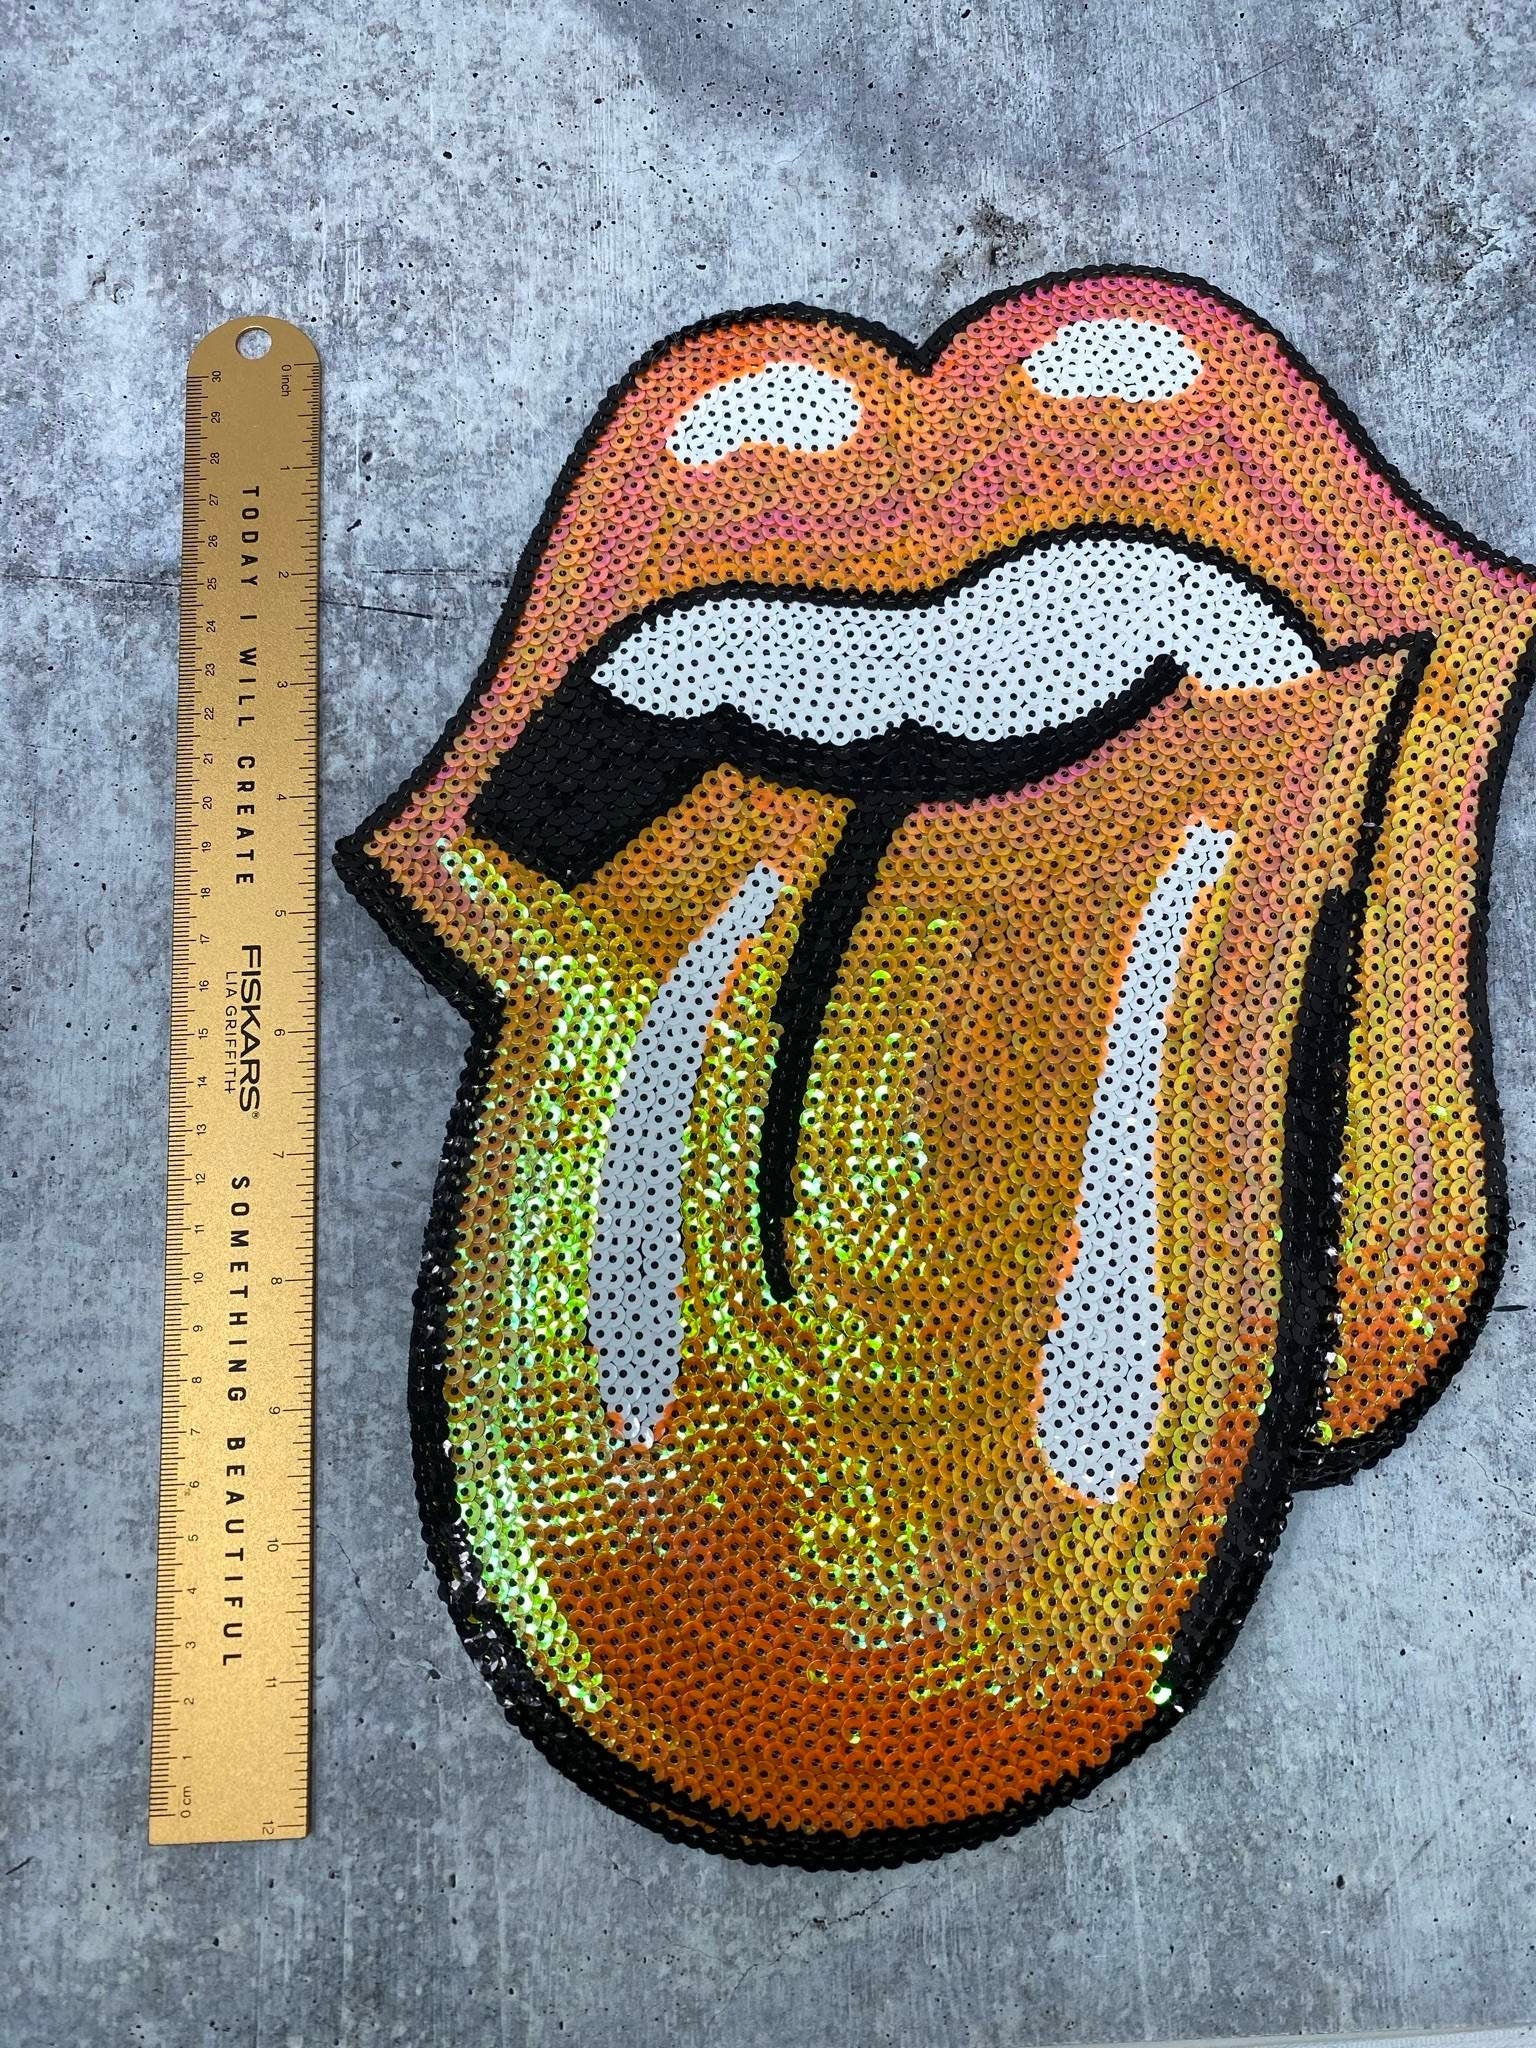 New, "ORANGE" Iridescent Sequins Lips and Tongue Patch (iron-on) Size 13", LARGE Bling Patch for Denim Jacket, Shirts, Hoodies, and More